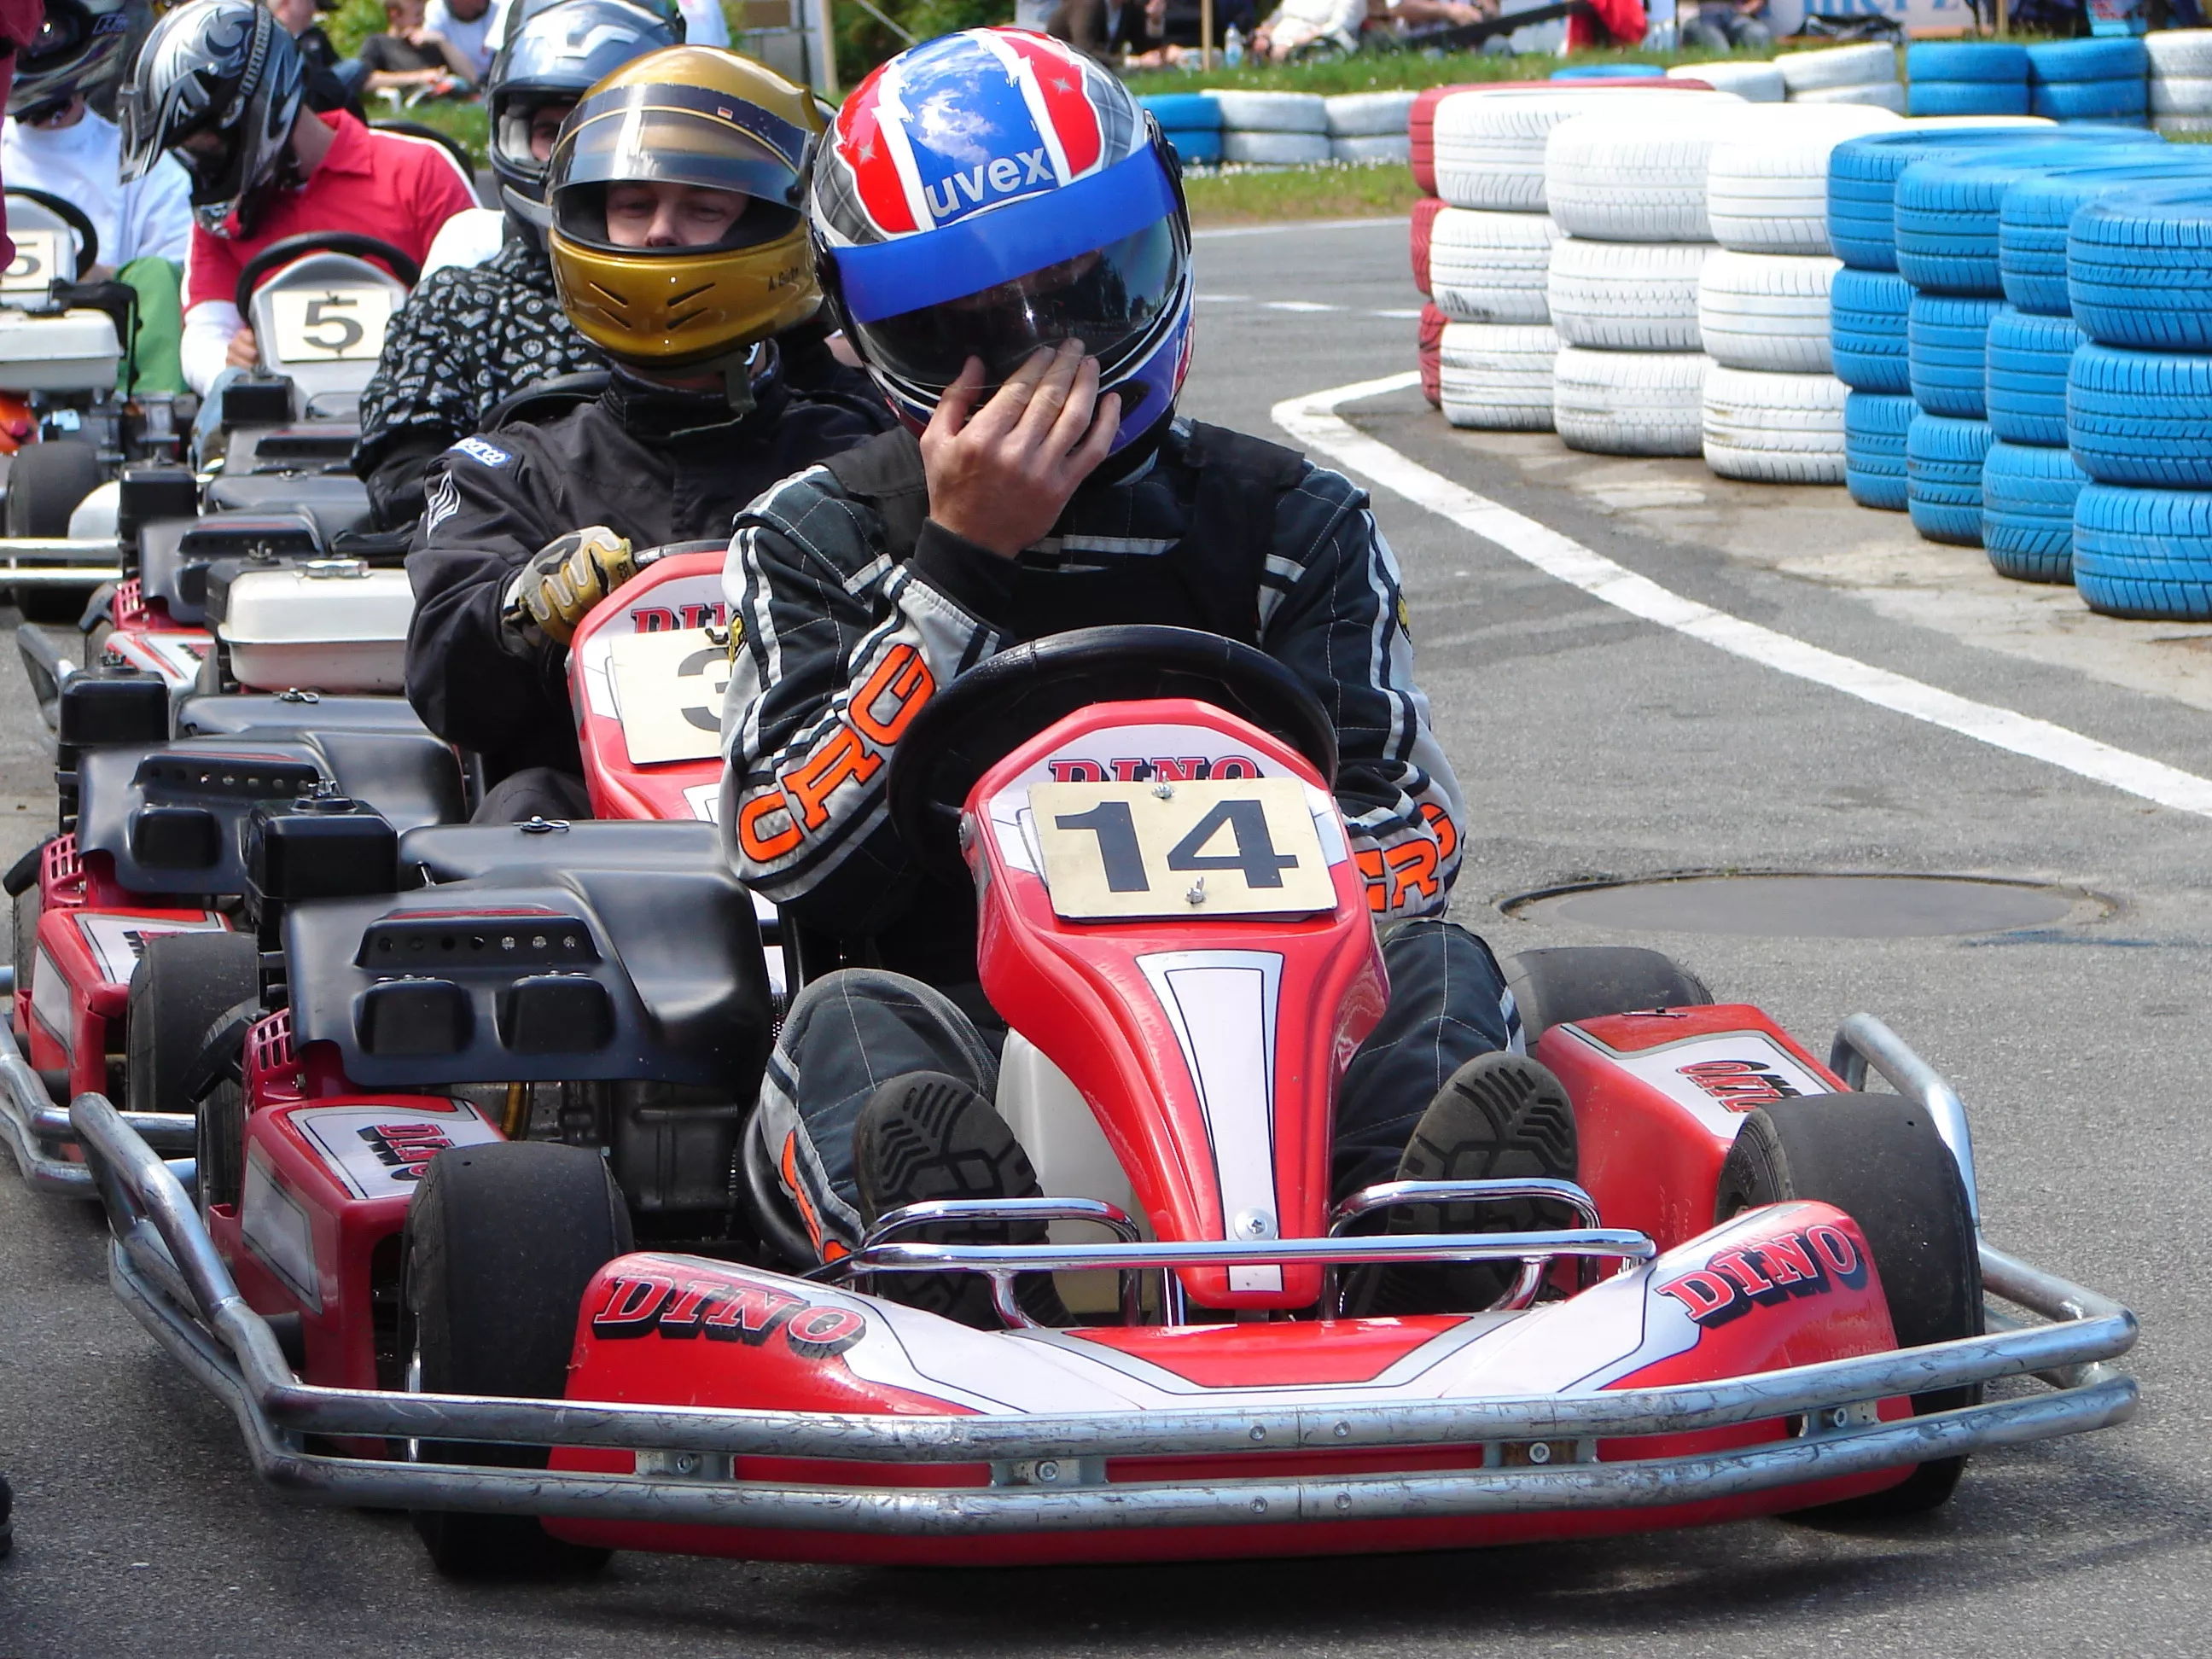 Blue Mountain Go Karts in Canada, North America | Karting - Rated 0.7